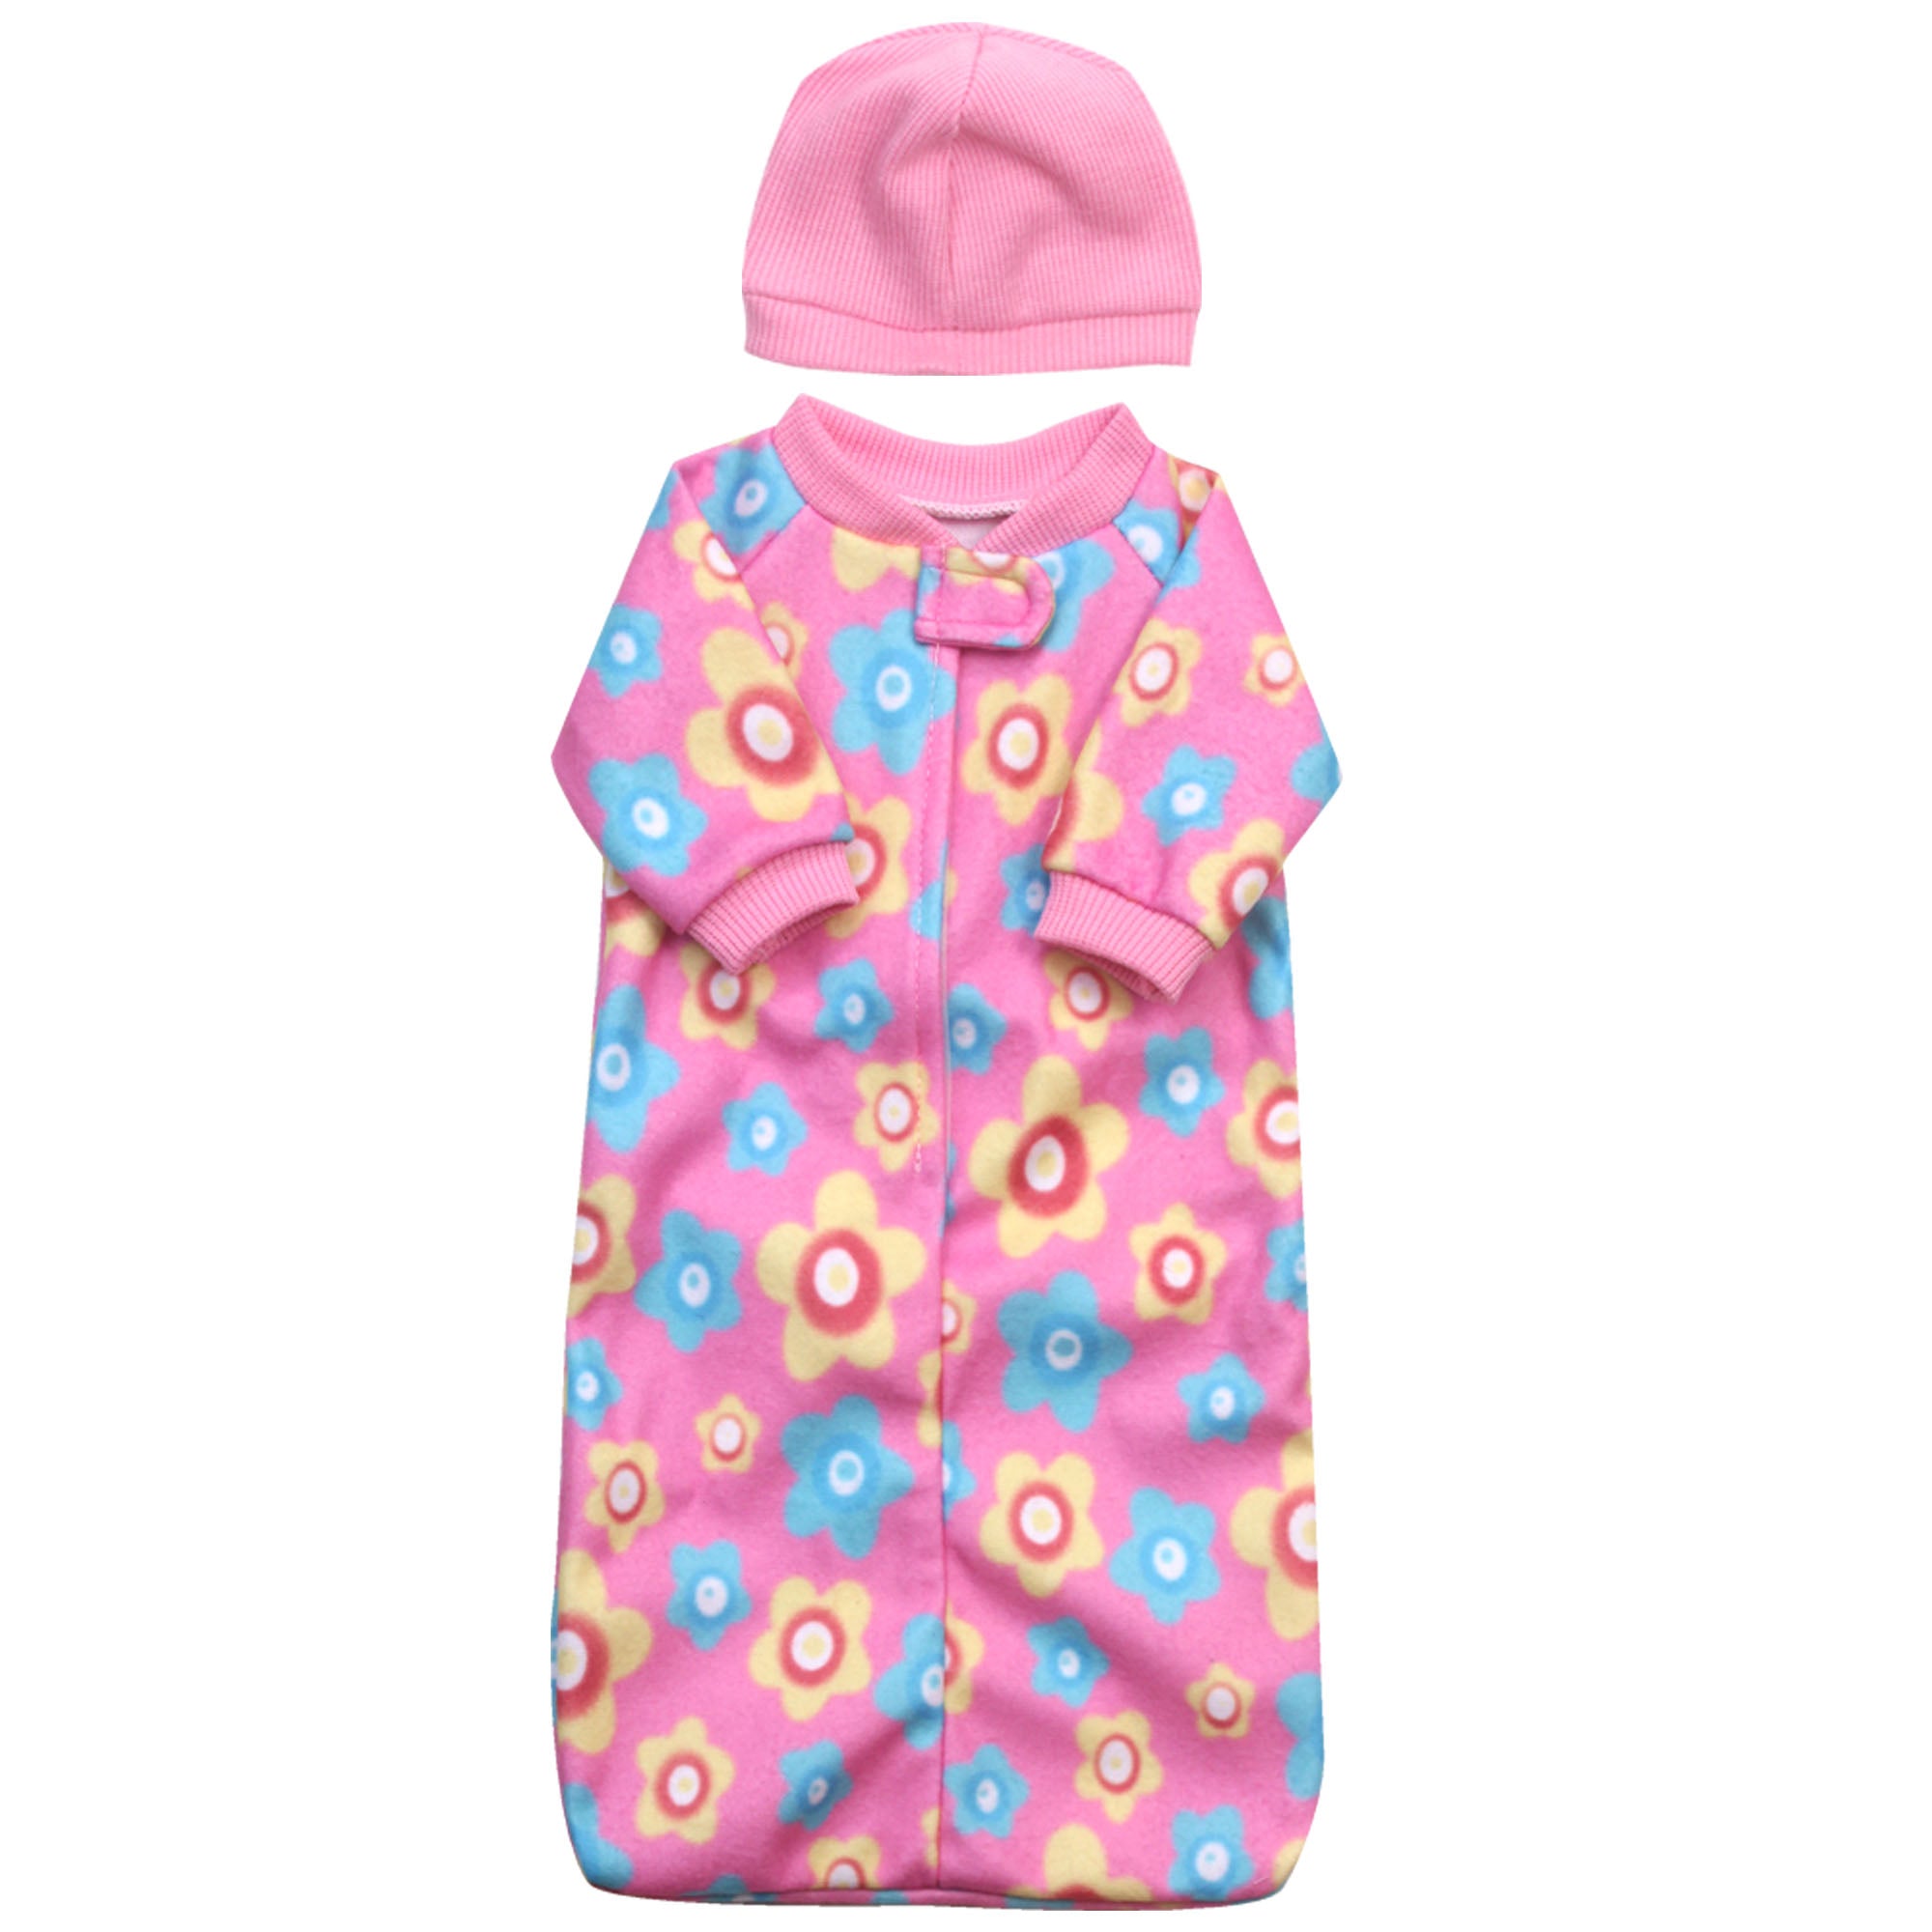 Sophia's 2 Piece Sleep Sack and Hat Set for 15" Dolls, Pink